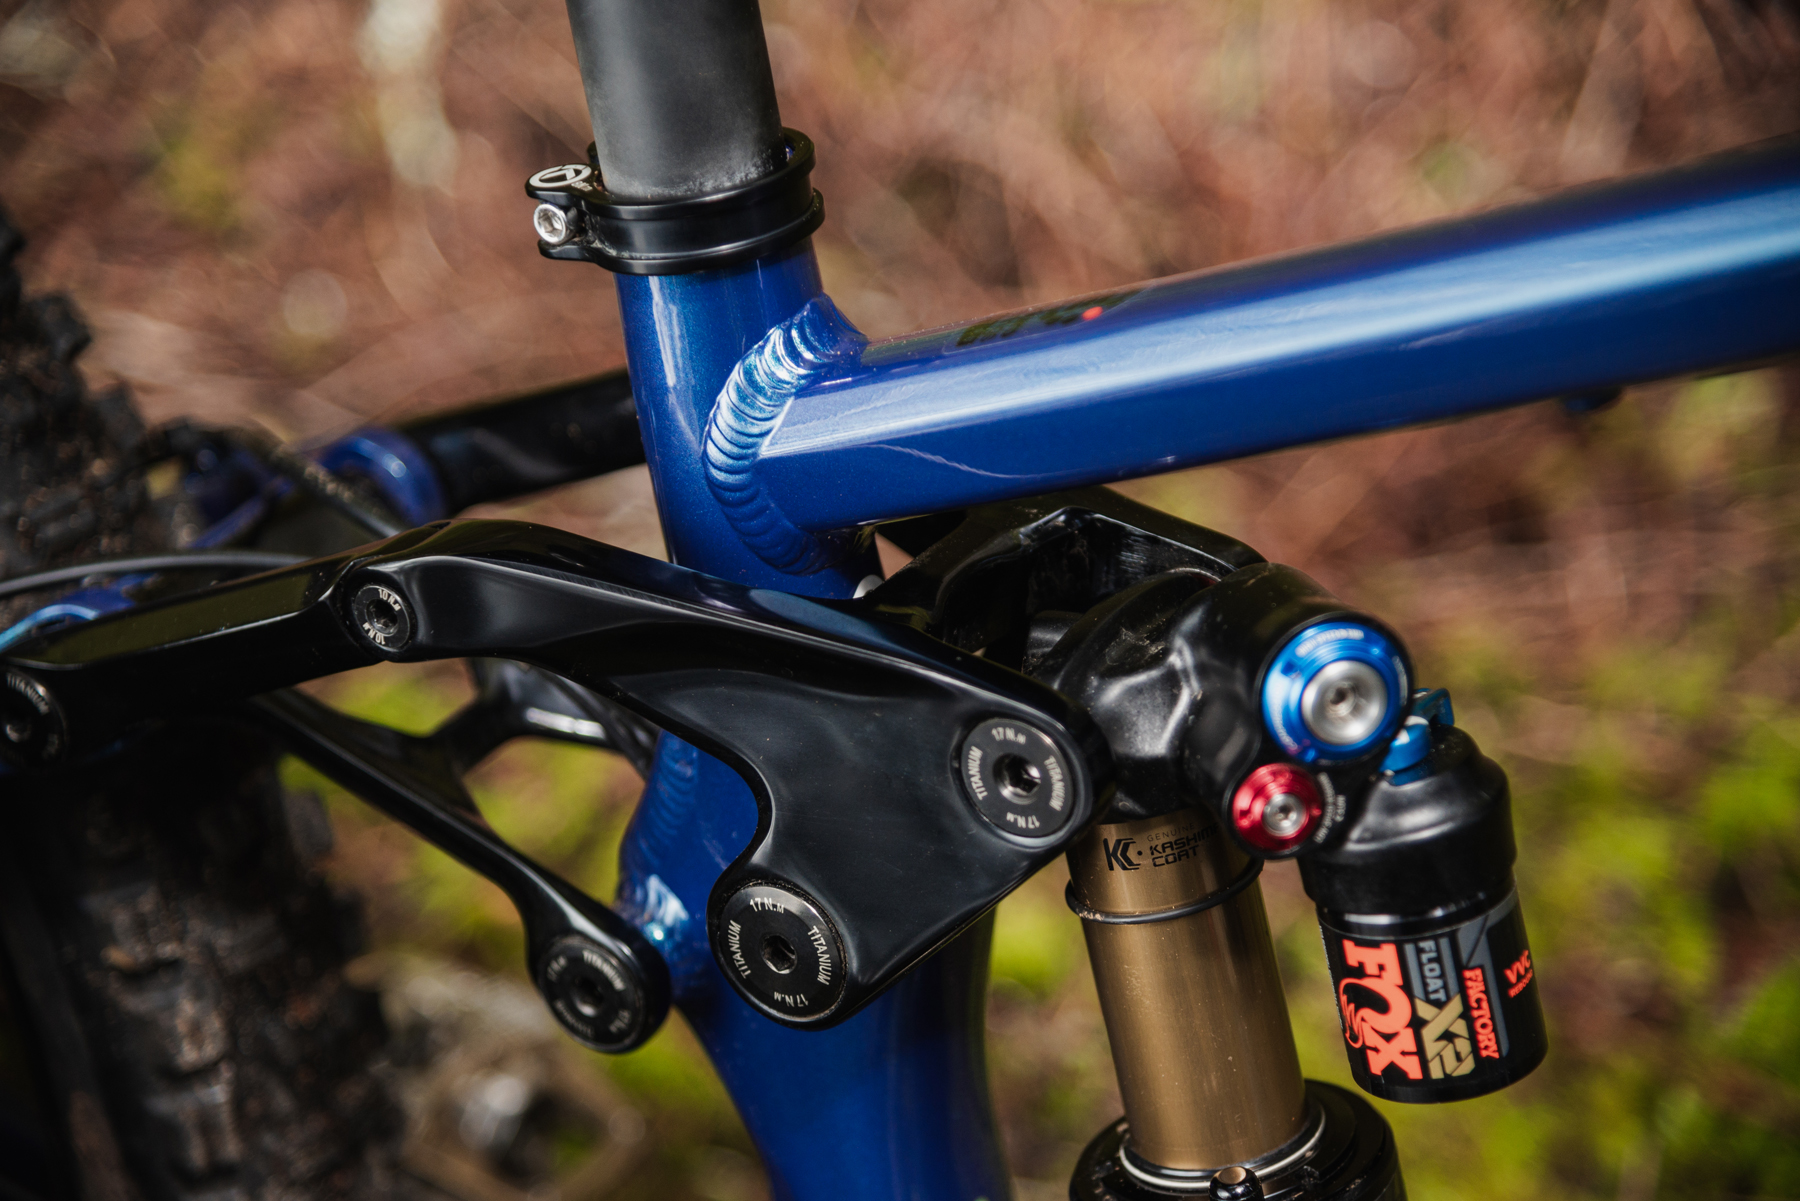 David Golay reviews the Knolly Warden MX for Blister